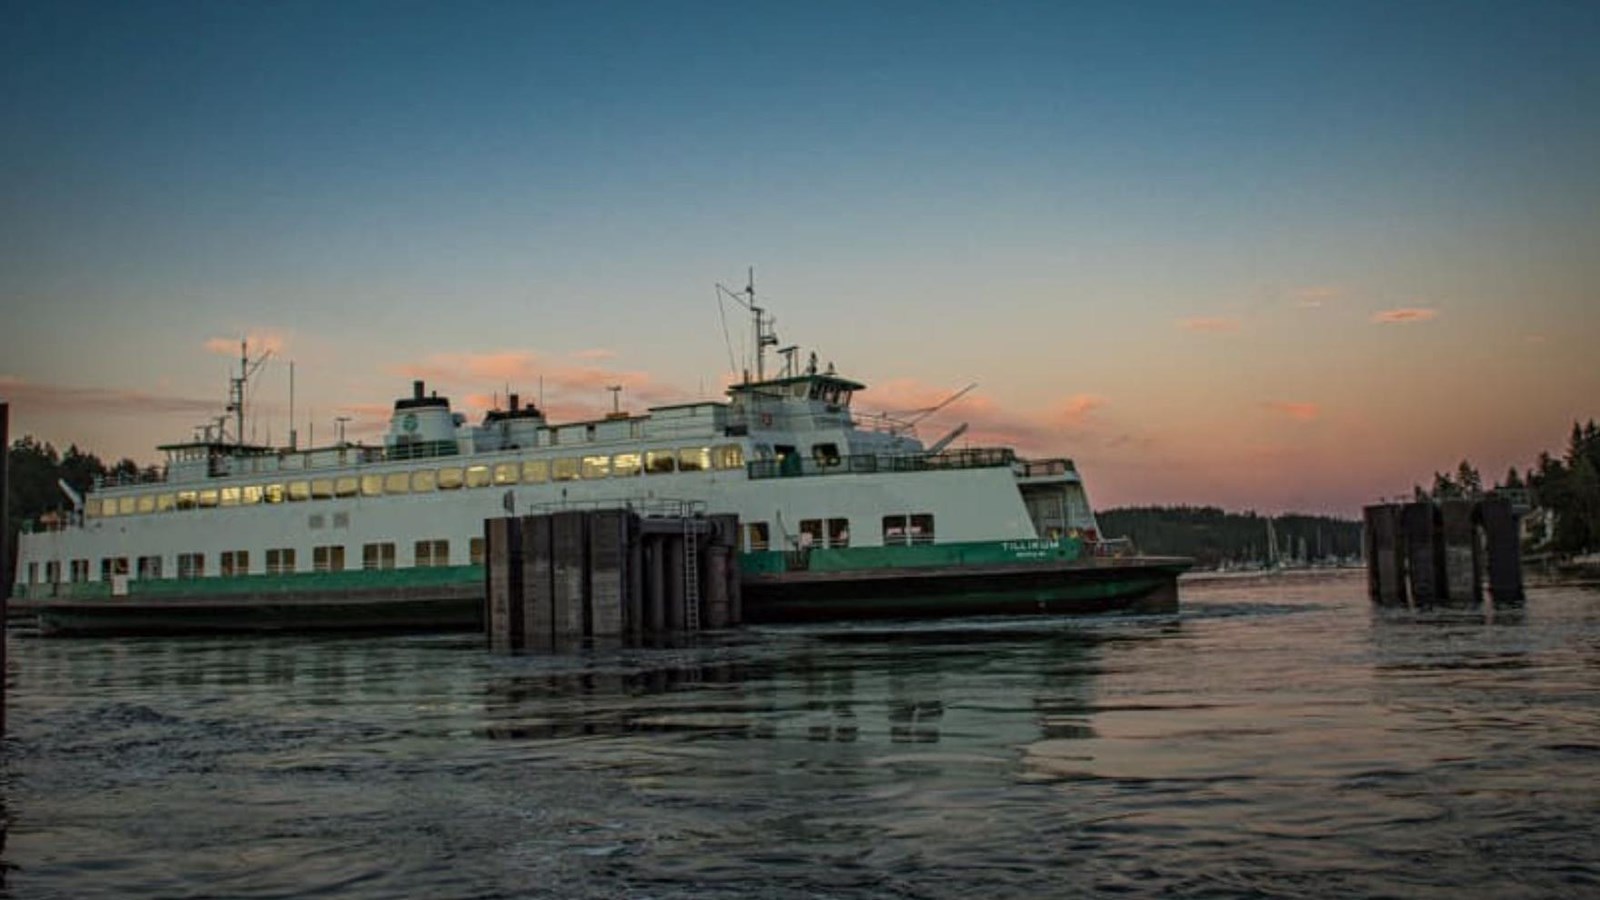 color photograph of a green and white ferry docking at sunset